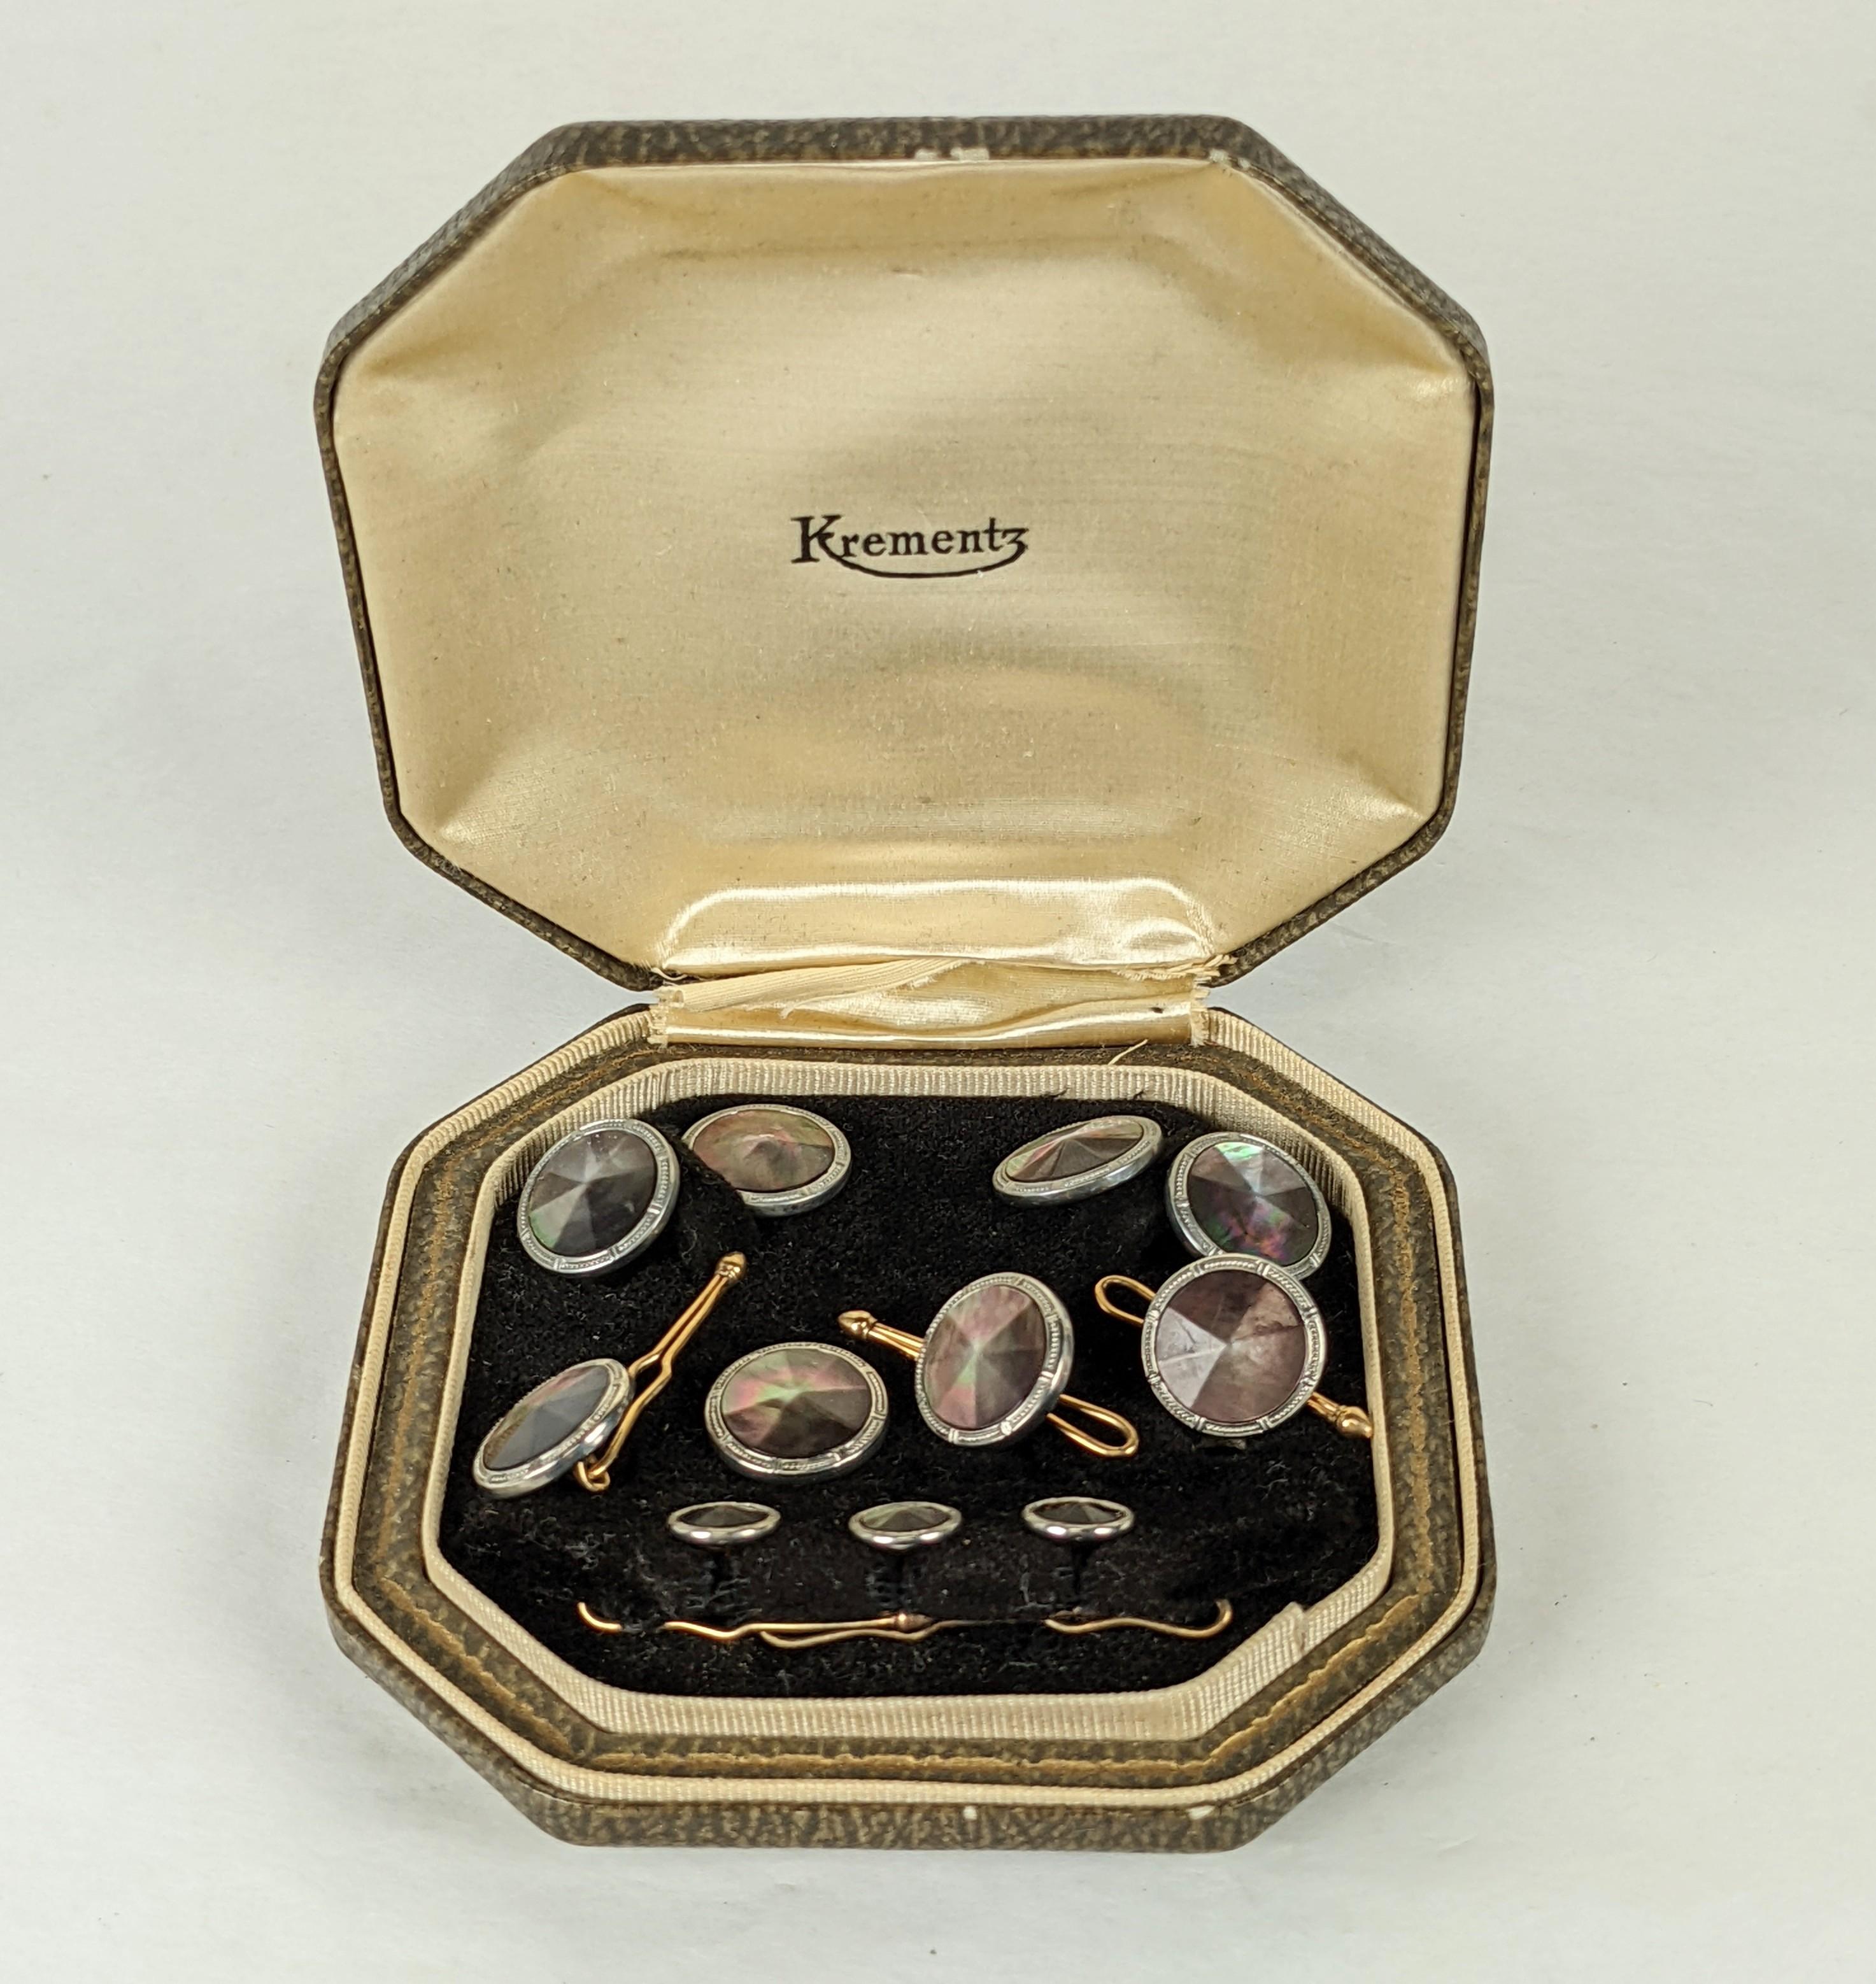 Krementz Art Deco Mother of Pearl Stud Set for use with tuxedo or dress shirt. Unusual grey mother of pearl is faceted in a radiating pattern set in chrome metal with gold filled backings. Set includes pair of cufflinks (5/8